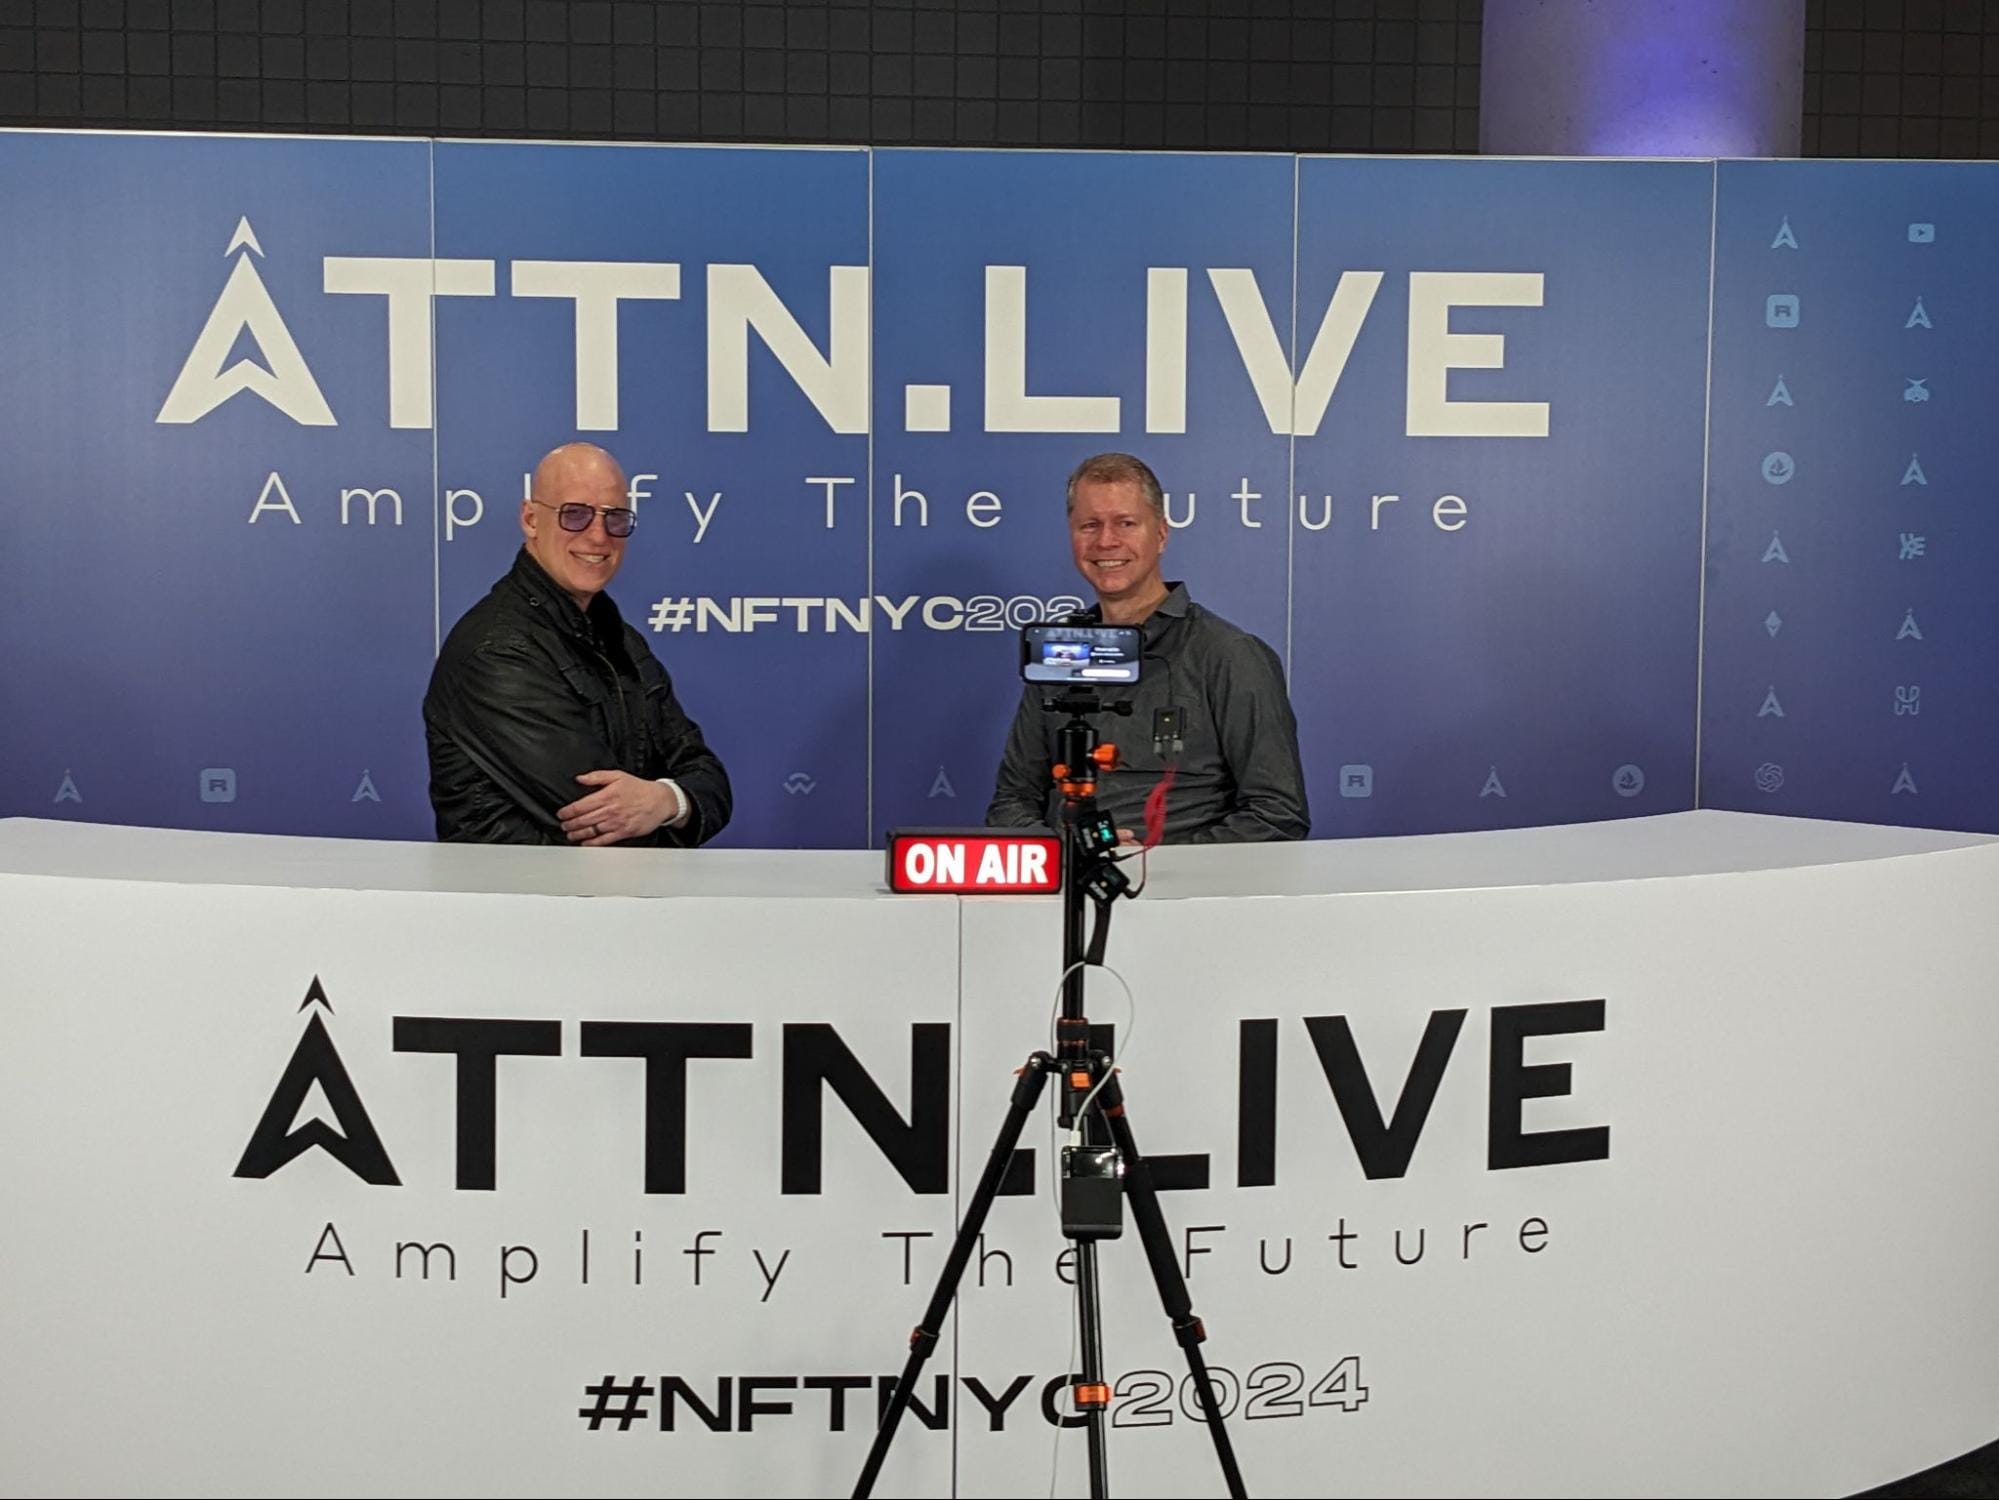 David Iseminger being interviewed on ATTNLIVE streaming service.